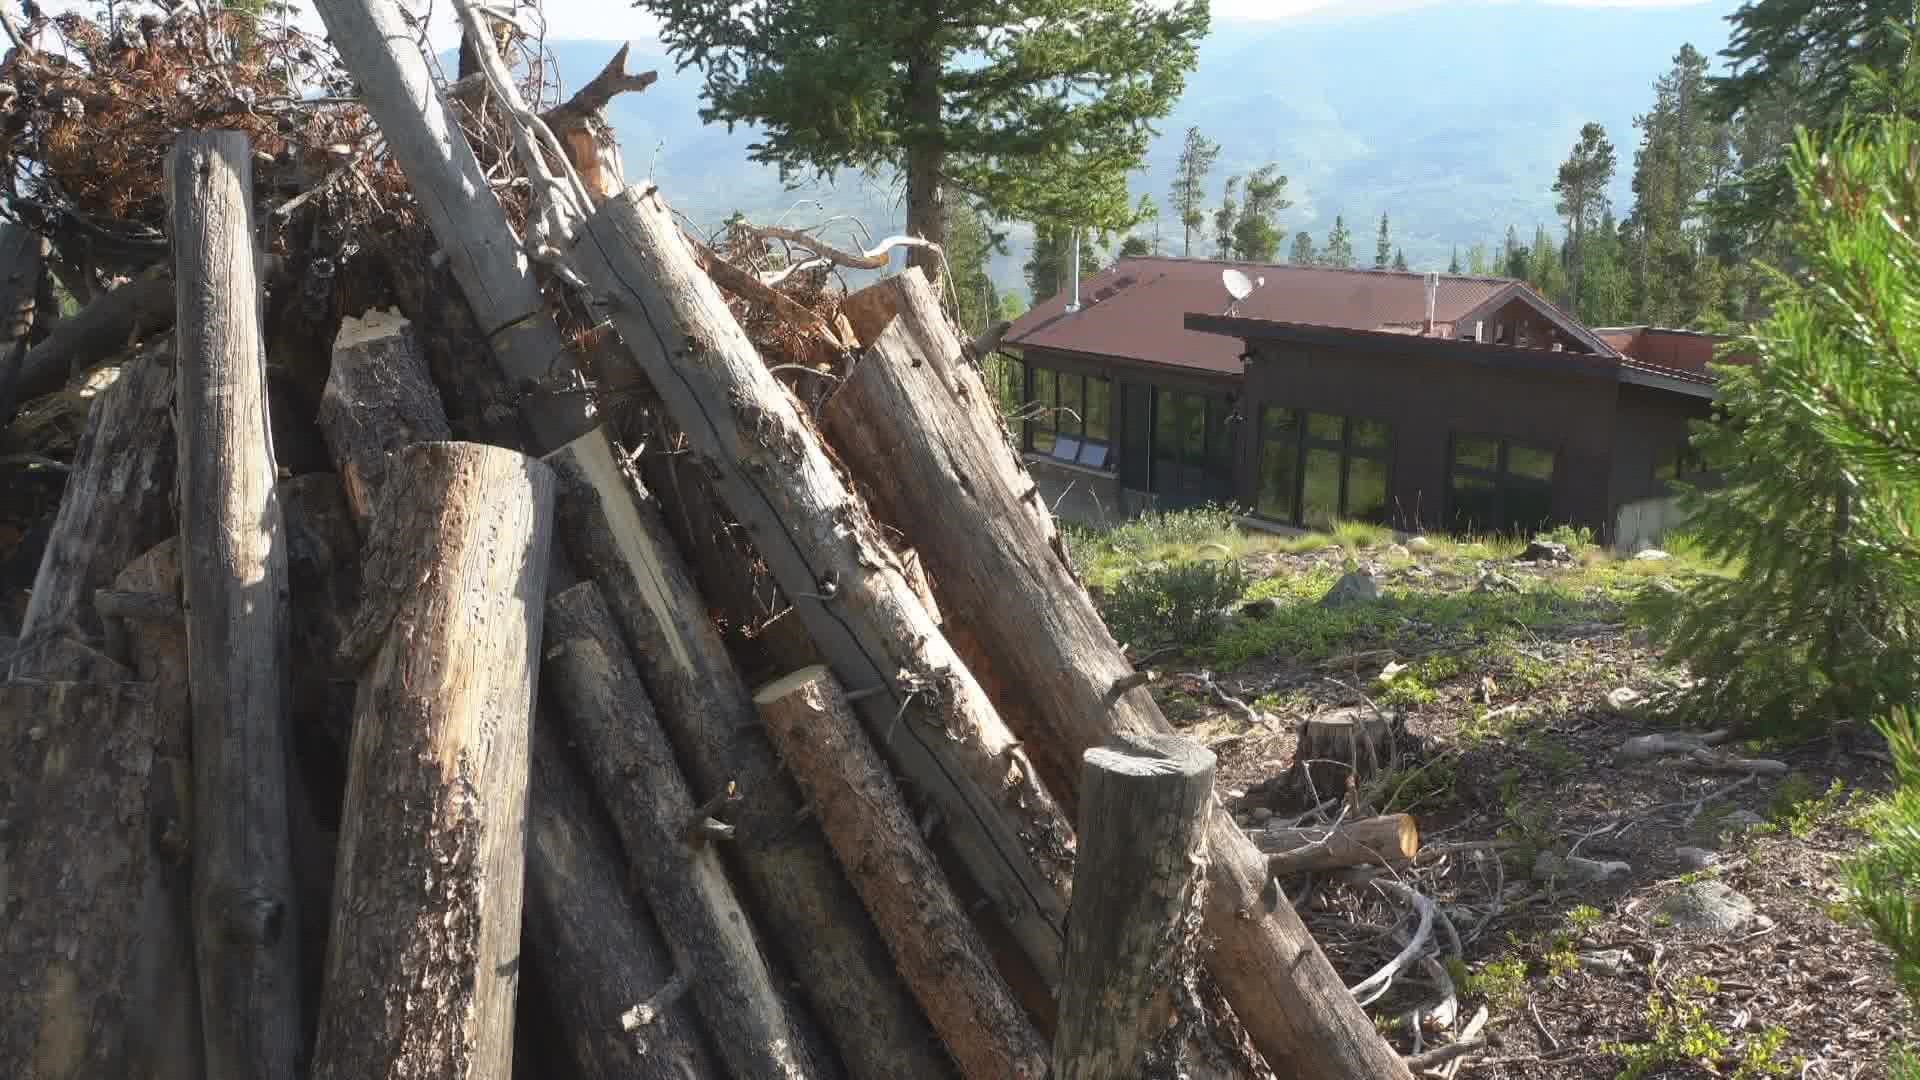 Crews are using hand tools to remove dead trees from wilderness land next to the Ruby Ranch neighborhood in Silverthorne.